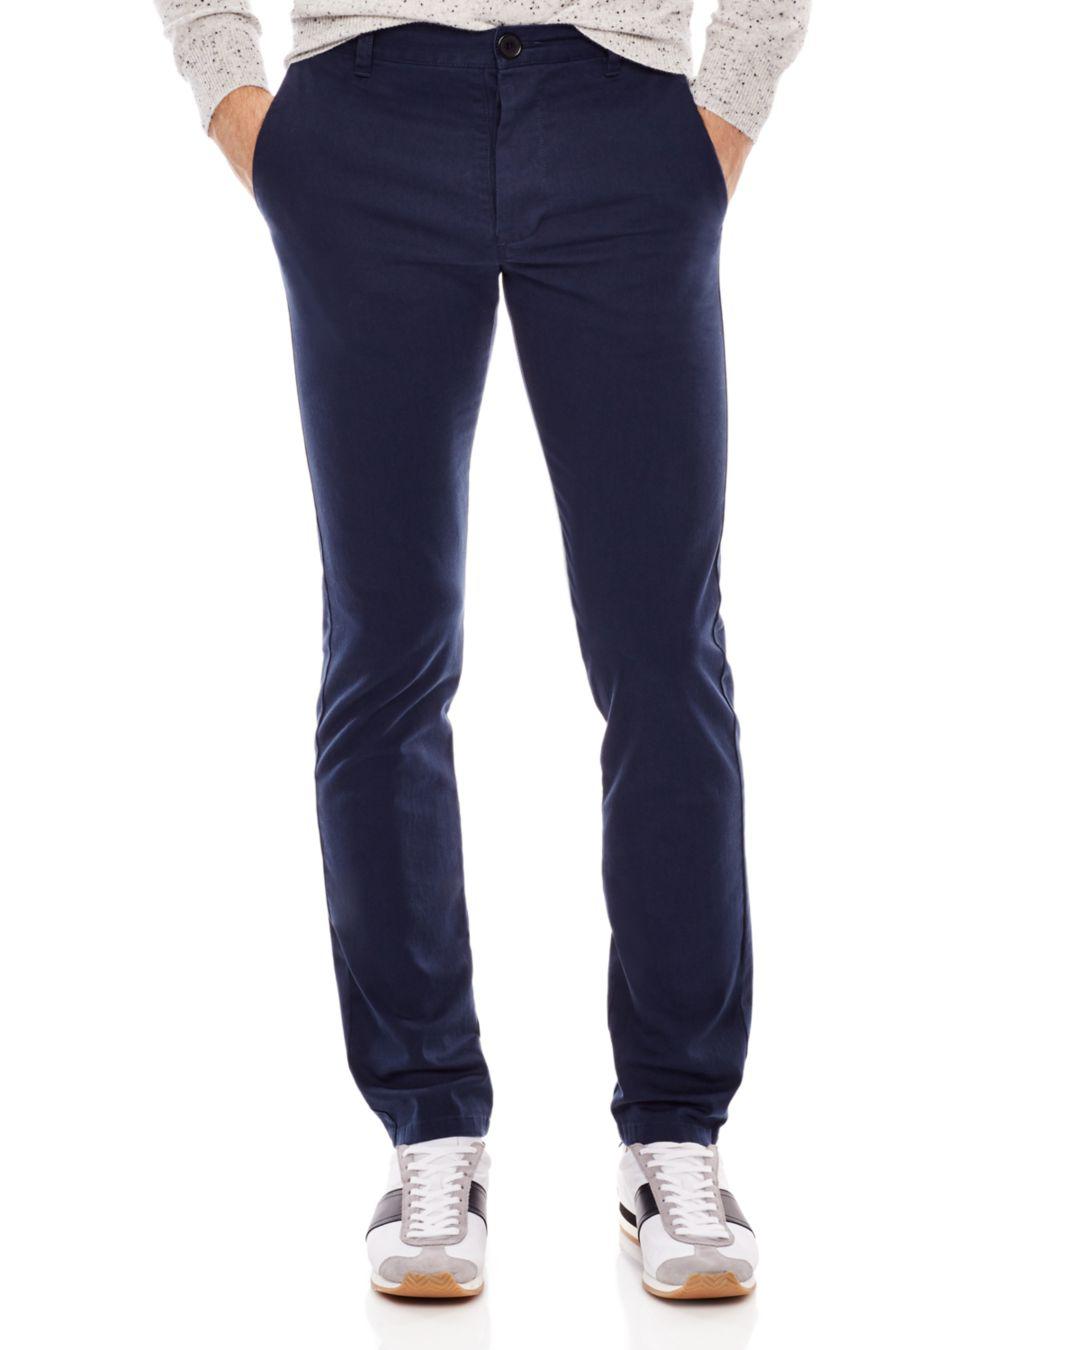 Sandro Stretch Cotton Slim Fit Chinos in Marine (Blue) for Men - Lyst